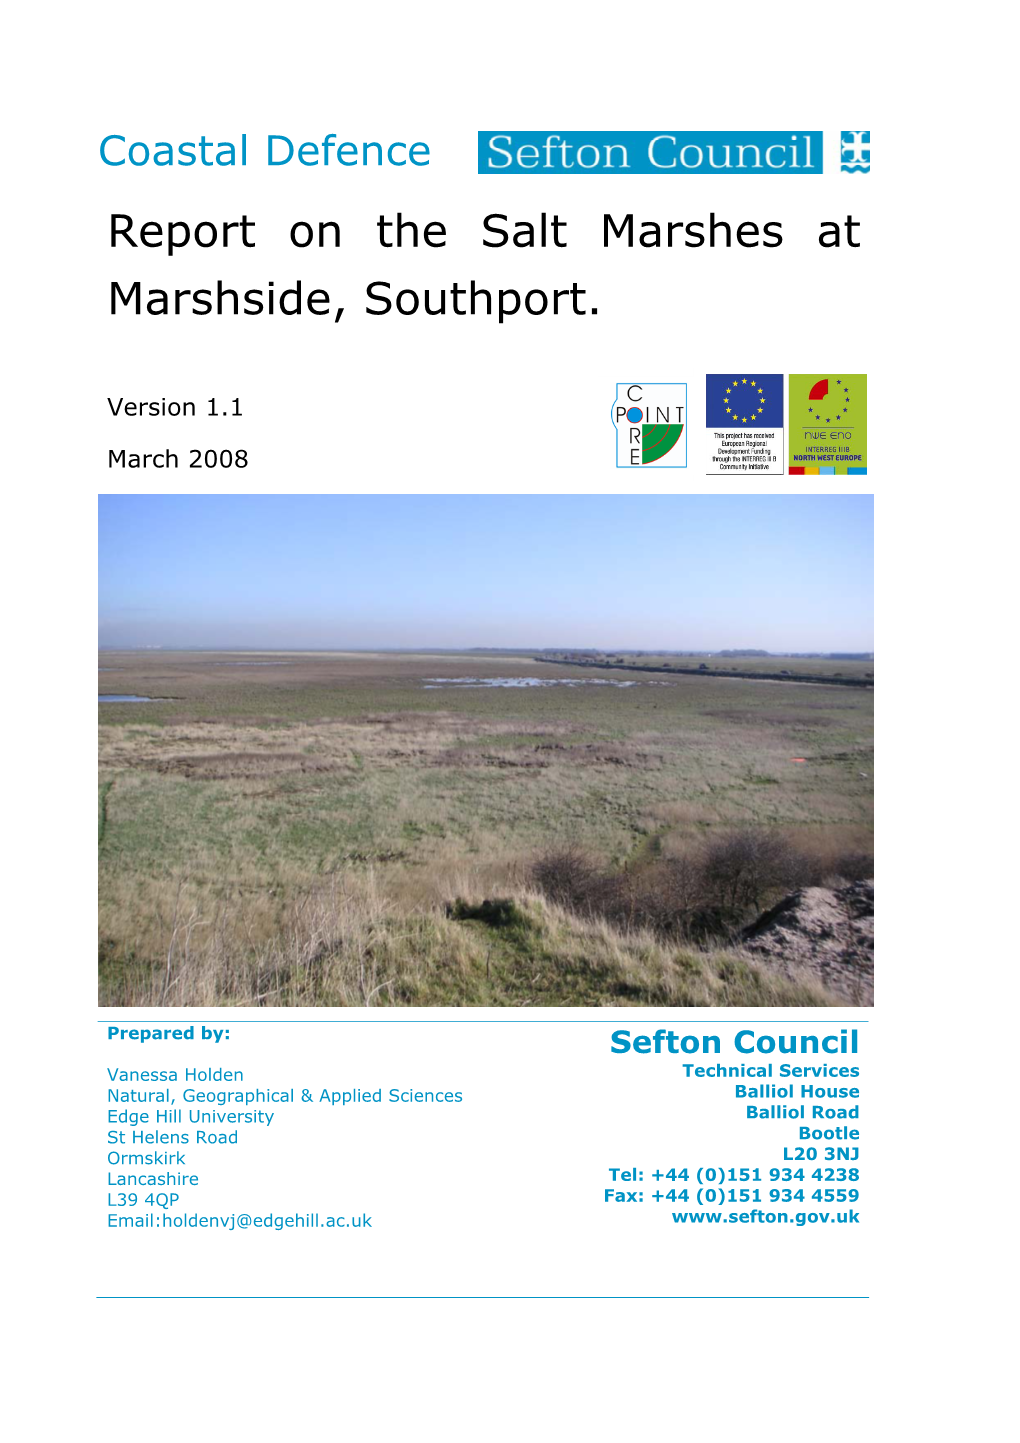 Report on the Salt Marshes at Marshside, Southport